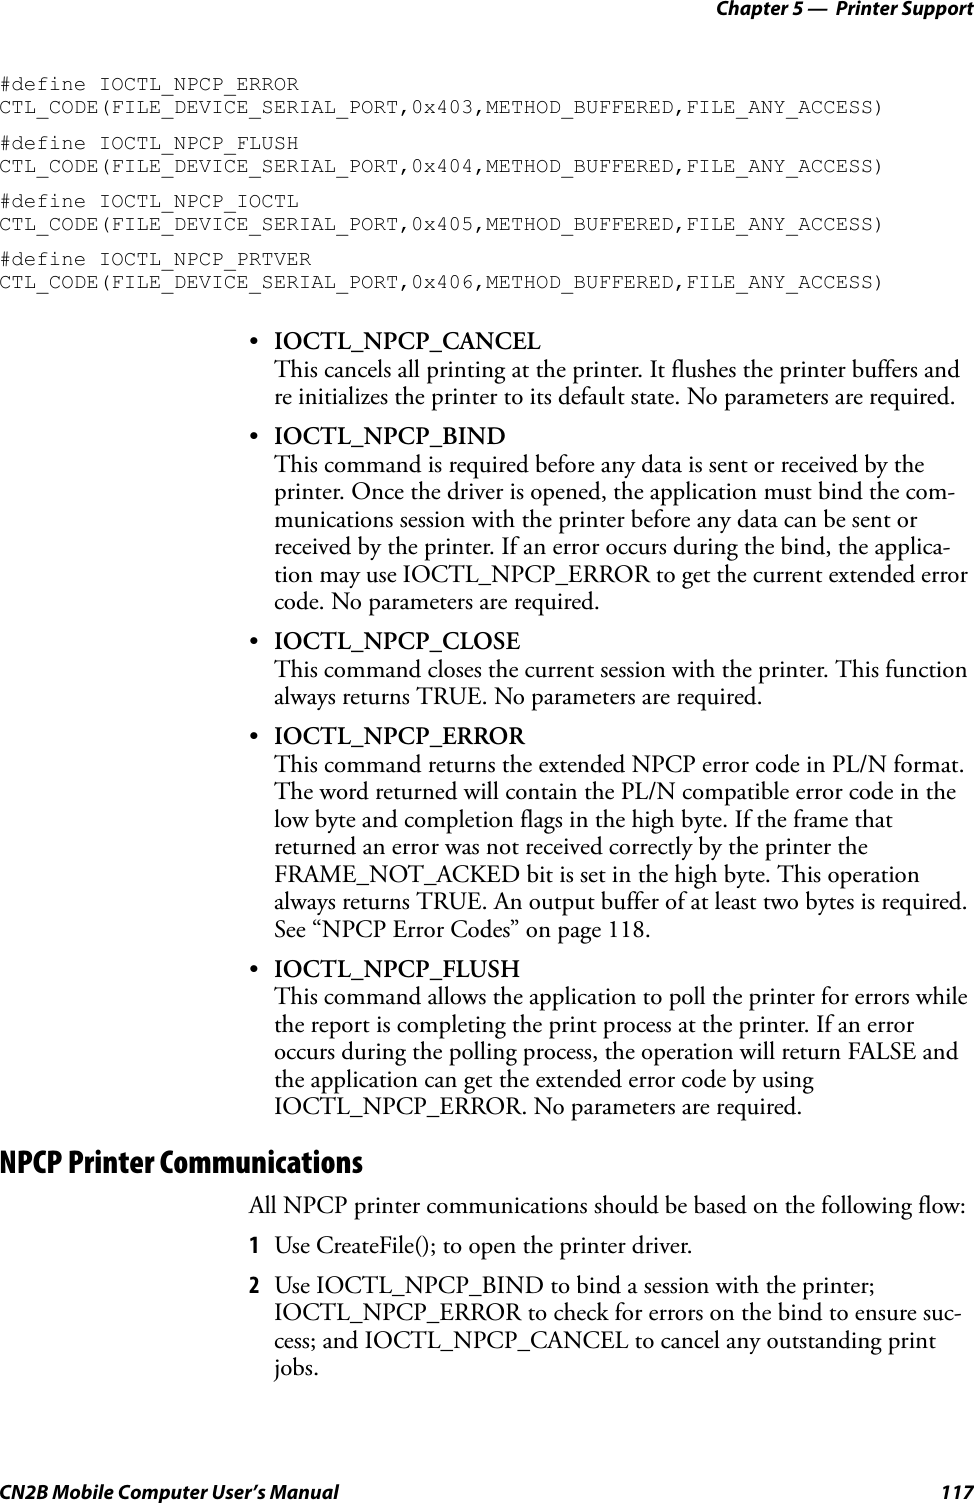 Chapter 5 —  Printer SupportCN2B Mobile Computer User’s Manual 117#define IOCTL_NPCP_ERROR CTL_CODE(FILE_DEVICE_SERIAL_PORT,0x403,METHOD_BUFFERED,FILE_ANY_ACCESS)#define IOCTL_NPCP_FLUSH CTL_CODE(FILE_DEVICE_SERIAL_PORT,0x404,METHOD_BUFFERED,FILE_ANY_ACCESS)#define IOCTL_NPCP_IOCTL CTL_CODE(FILE_DEVICE_SERIAL_PORT,0x405,METHOD_BUFFERED,FILE_ANY_ACCESS)#define IOCTL_NPCP_PRTVER CTL_CODE(FILE_DEVICE_SERIAL_PORT,0x406,METHOD_BUFFERED,FILE_ANY_ACCESS)•IOCTL_NPCP_CANCELThis cancels all printing at the printer. It flushes the printer buffers and re initializes the printer to its default state. No parameters are required.•IOCTL_NPCP_BINDThis command is required before any data is sent or received by the printer. Once the driver is opened, the application must bind the com-munications session with the printer before any data can be sent or received by the printer. If an error occurs during the bind, the applica-tion may use IOCTL_NPCP_ERROR to get the current extended error code. No parameters are required.•IOCTL_NPCP_CLOSEThis command closes the current session with the printer. This function always returns TRUE. No parameters are required.•IOCTL_NPCP_ERRORThis command returns the extended NPCP error code in PL/N format. The word returned will contain the PL/N compatible error code in the low byte and completion flags in the high byte. If the frame that returned an error was not received correctly by the printer the FRAME_NOT_ACKED bit is set in the high byte. This operation always returns TRUE. An output buffer of at least two bytes is required. See “NPCP Error Codes” on page 118.•IOCTL_NPCP_FLUSHThis command allows the application to poll the printer for errors while the report is completing the print process at the printer. If an error occurs during the polling process, the operation will return FALSE and the application can get the extended error code by using IOCTL_NPCP_ERROR. No parameters are required.NPCP Printer CommunicationsAll NPCP printer communications should be based on the following flow:1Use CreateFile(); to open the printer driver.2Use IOCTL_NPCP_BIND to bind a session with the printer; IOCTL_NPCP_ERROR to check for errors on the bind to ensure suc-cess; and IOCTL_NPCP_CANCEL to cancel any outstanding print jobs.